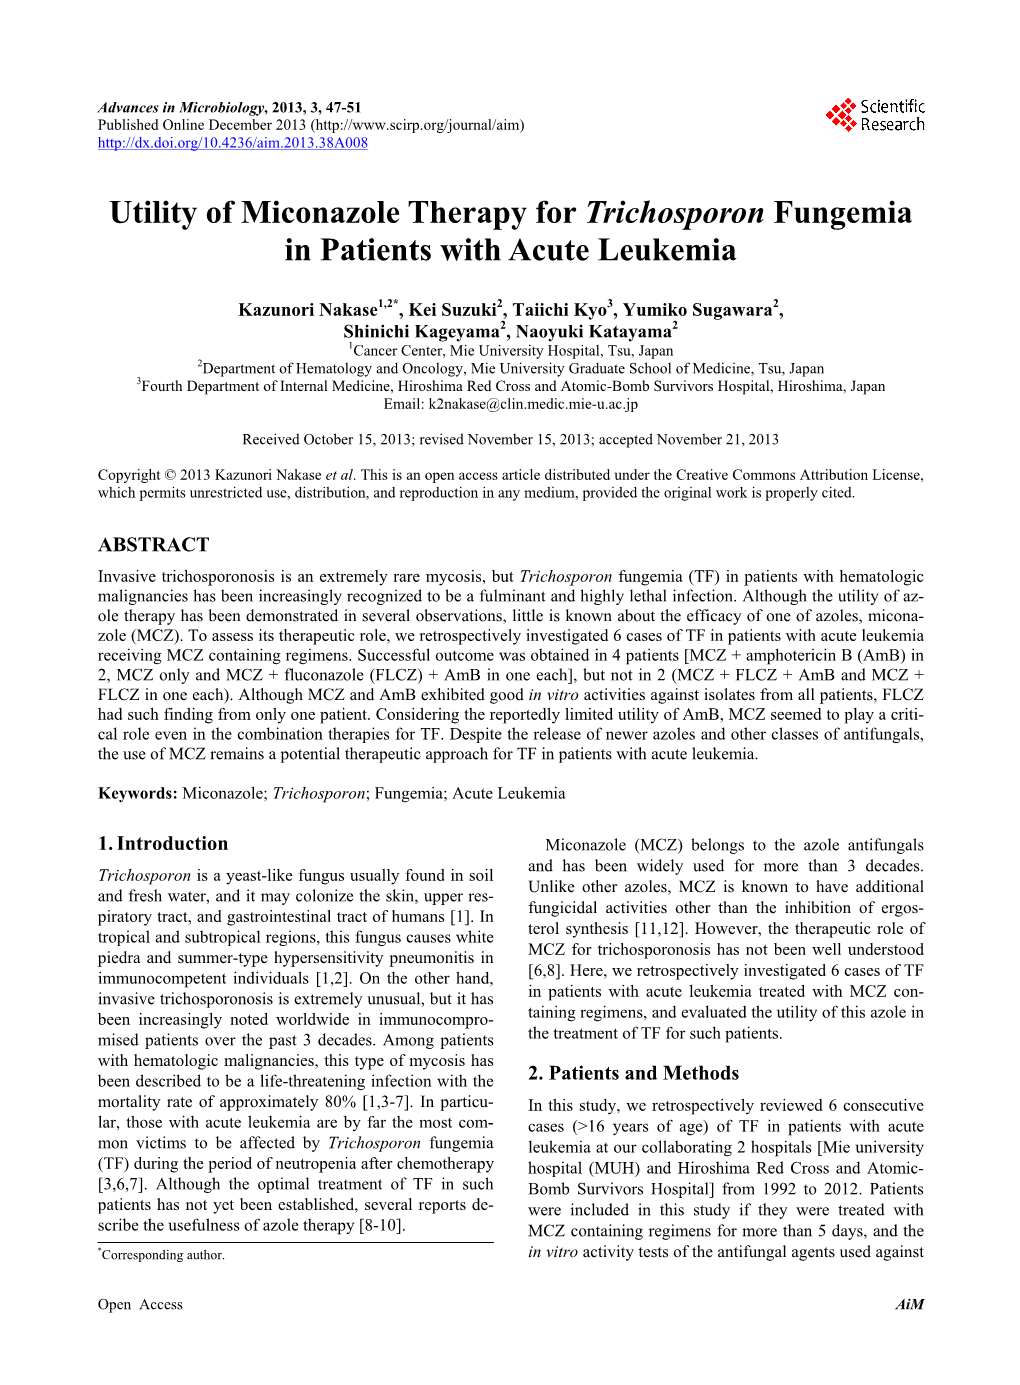 Utility of Miconazole Therapy for Trichosporon Fungemia in Patients with Acute Leukemia